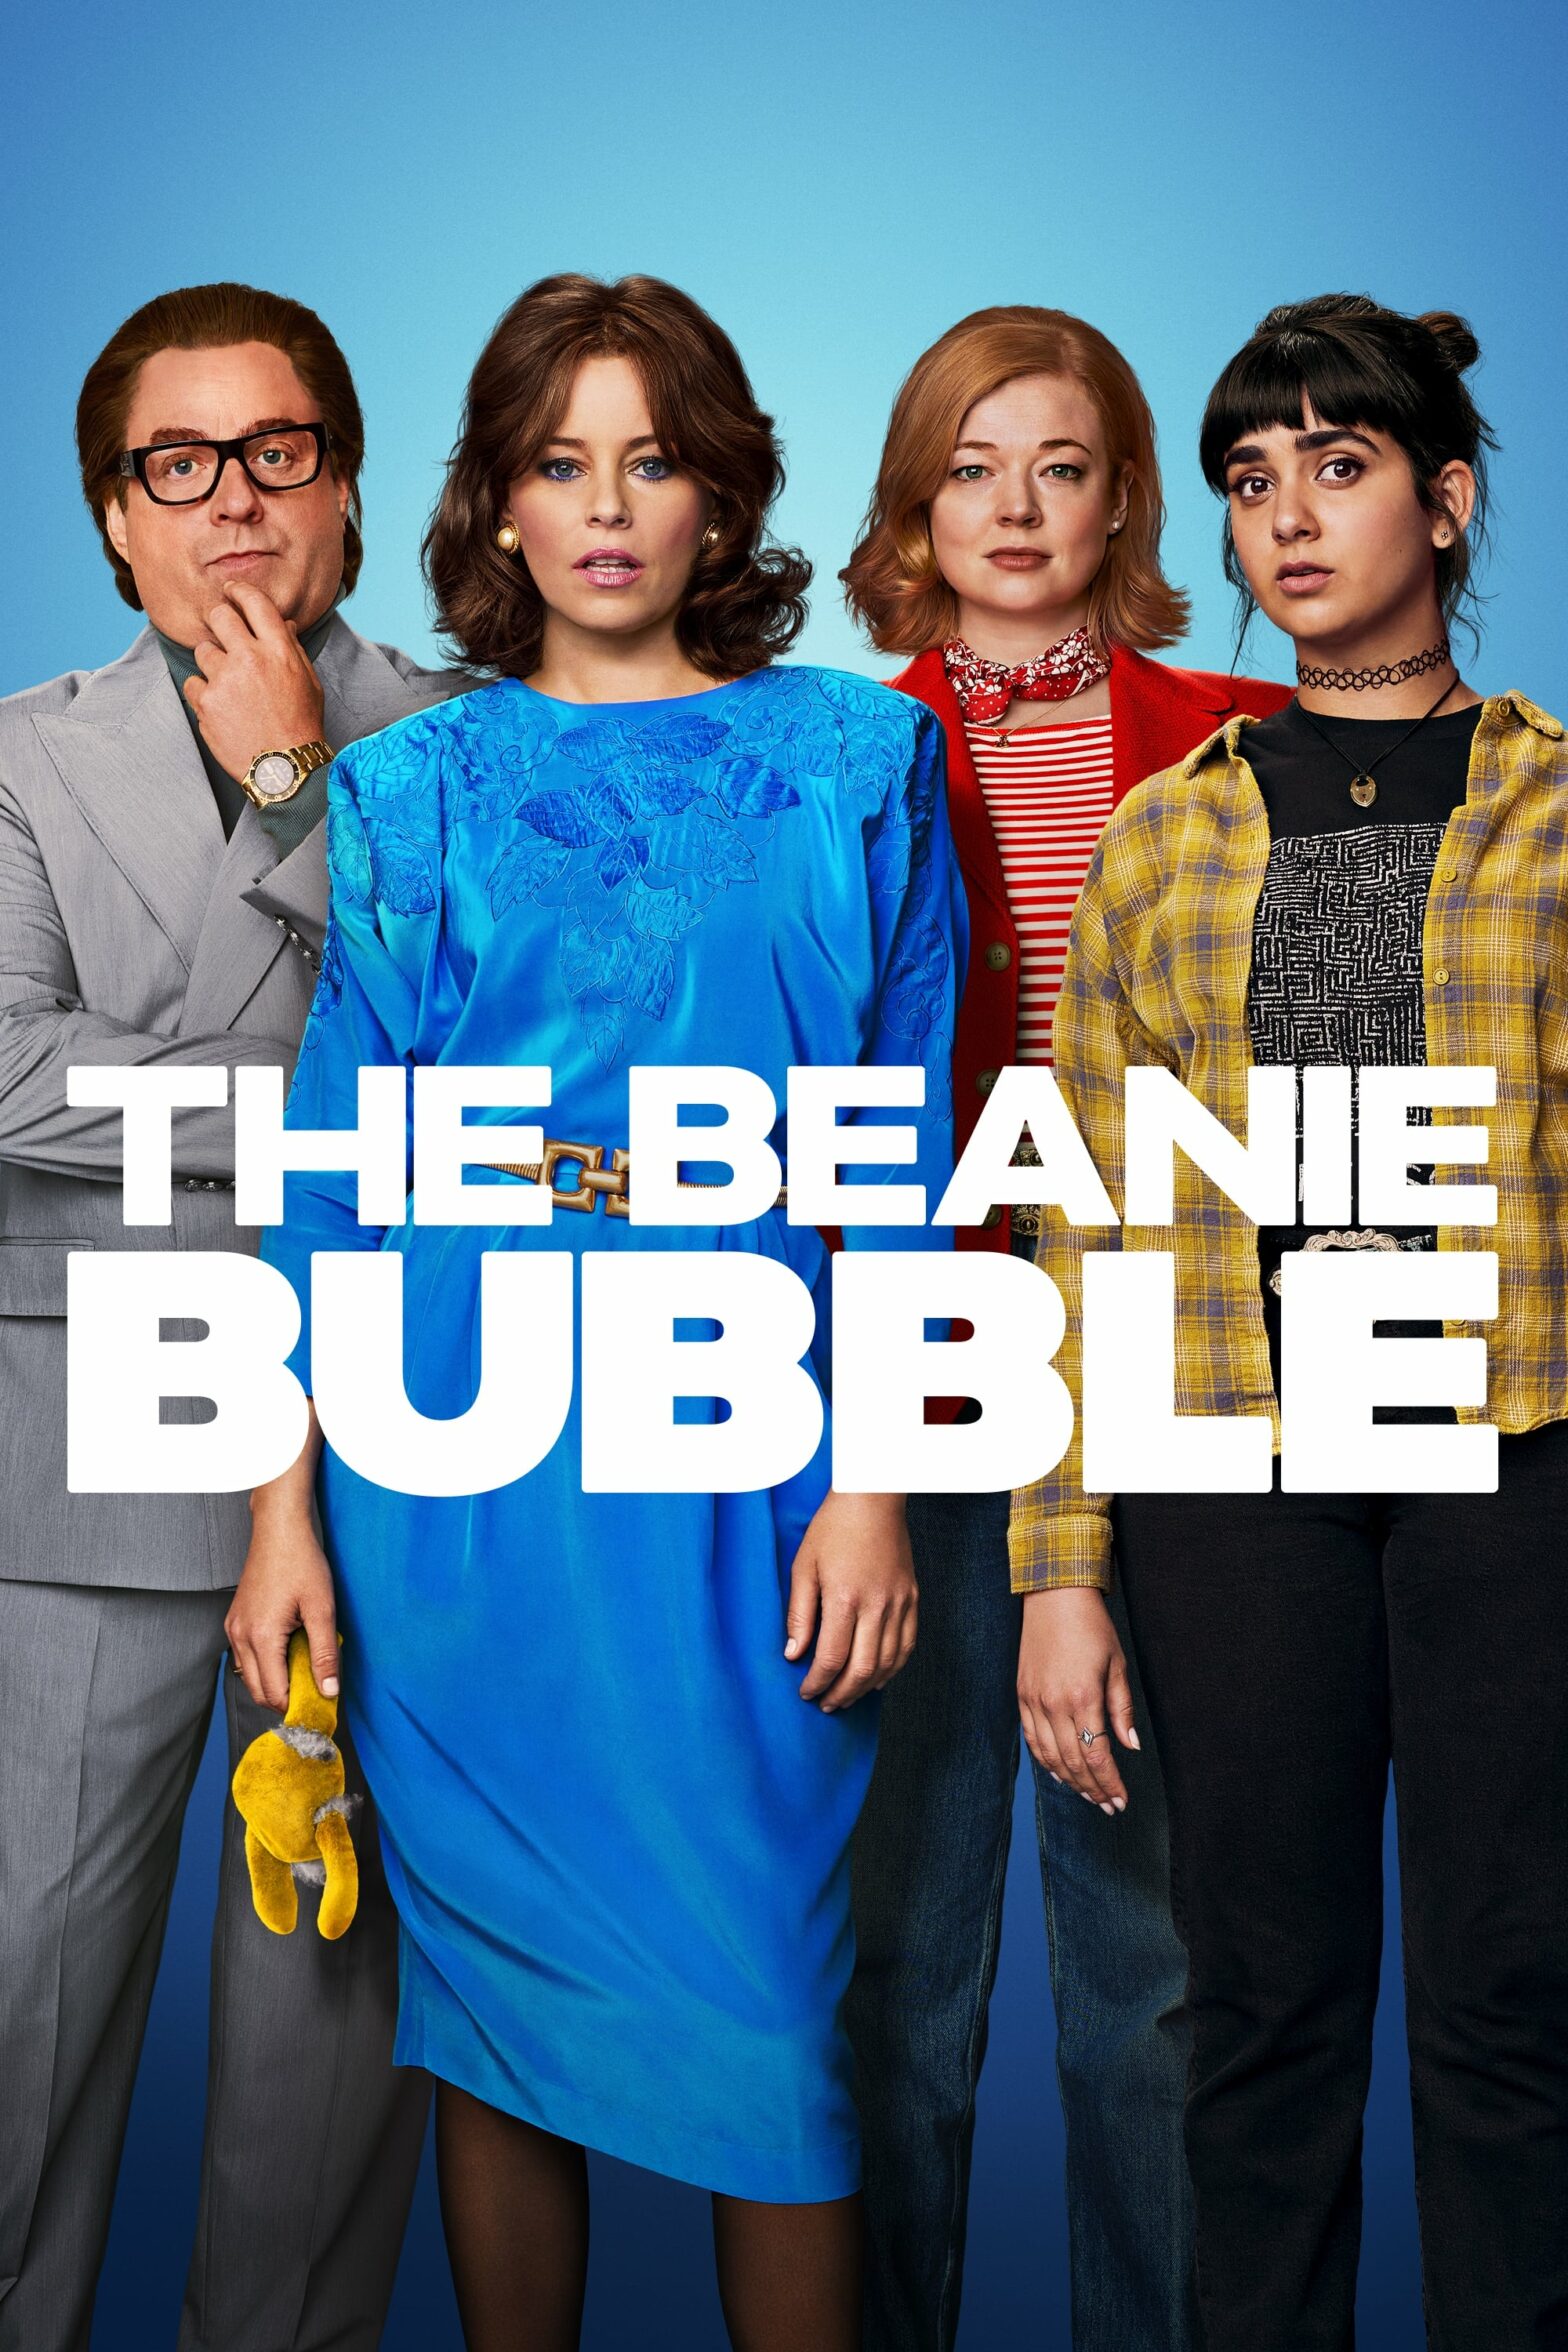 Poster for the movie "The Beanie Bubble"